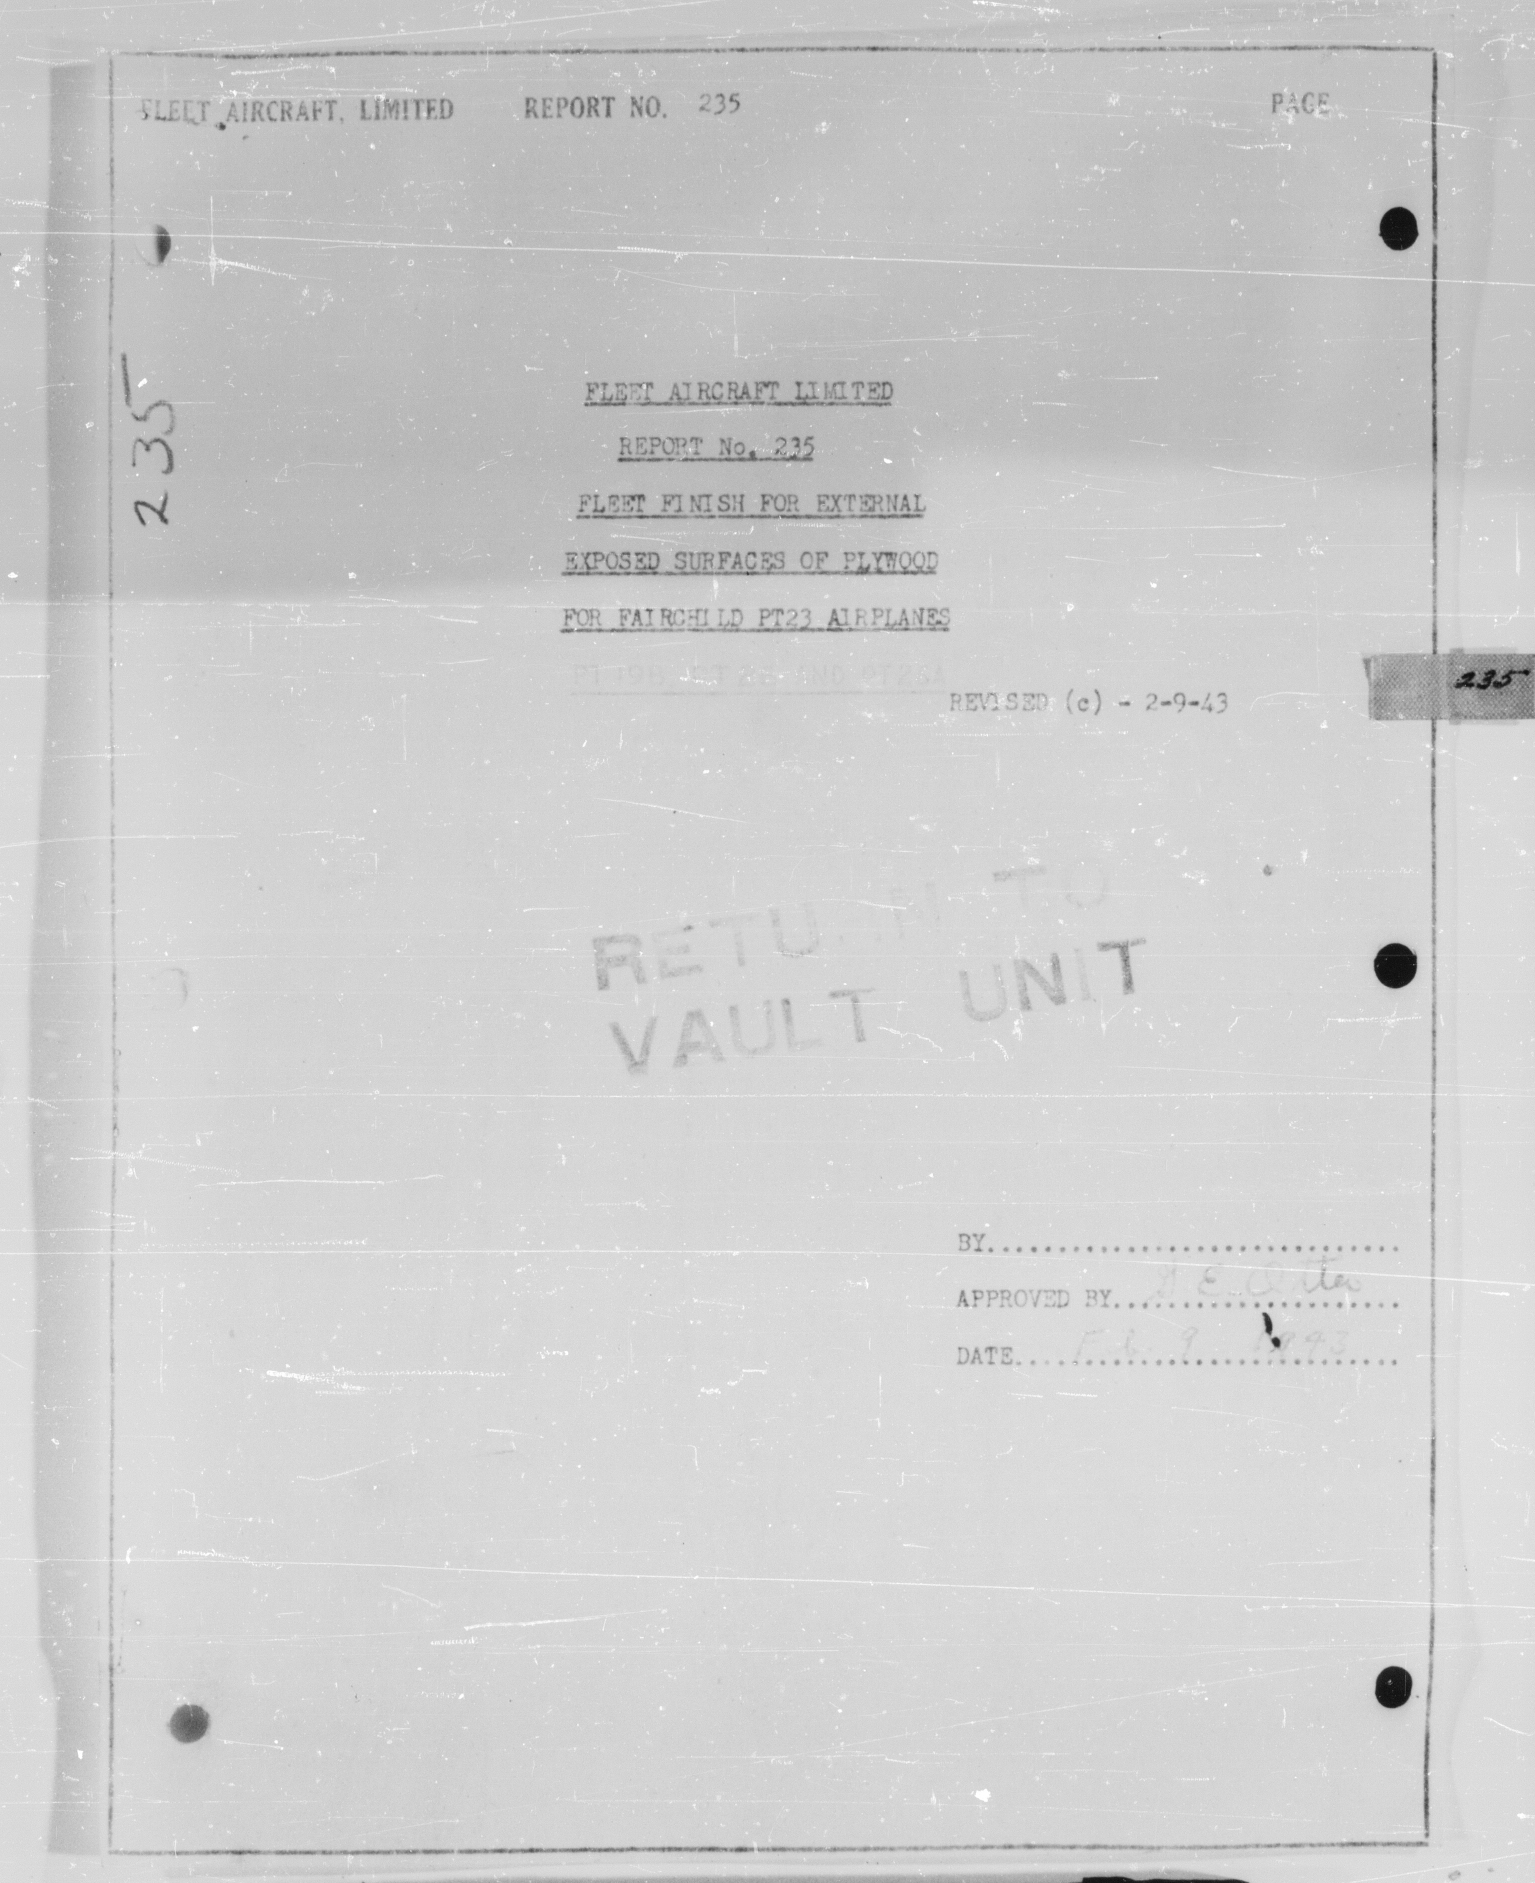 Sample page 1 from AirCorps Library document: Fleet Finish for External Exposed Surfaces of Plywood for Fairchild PT-23 Airplanes